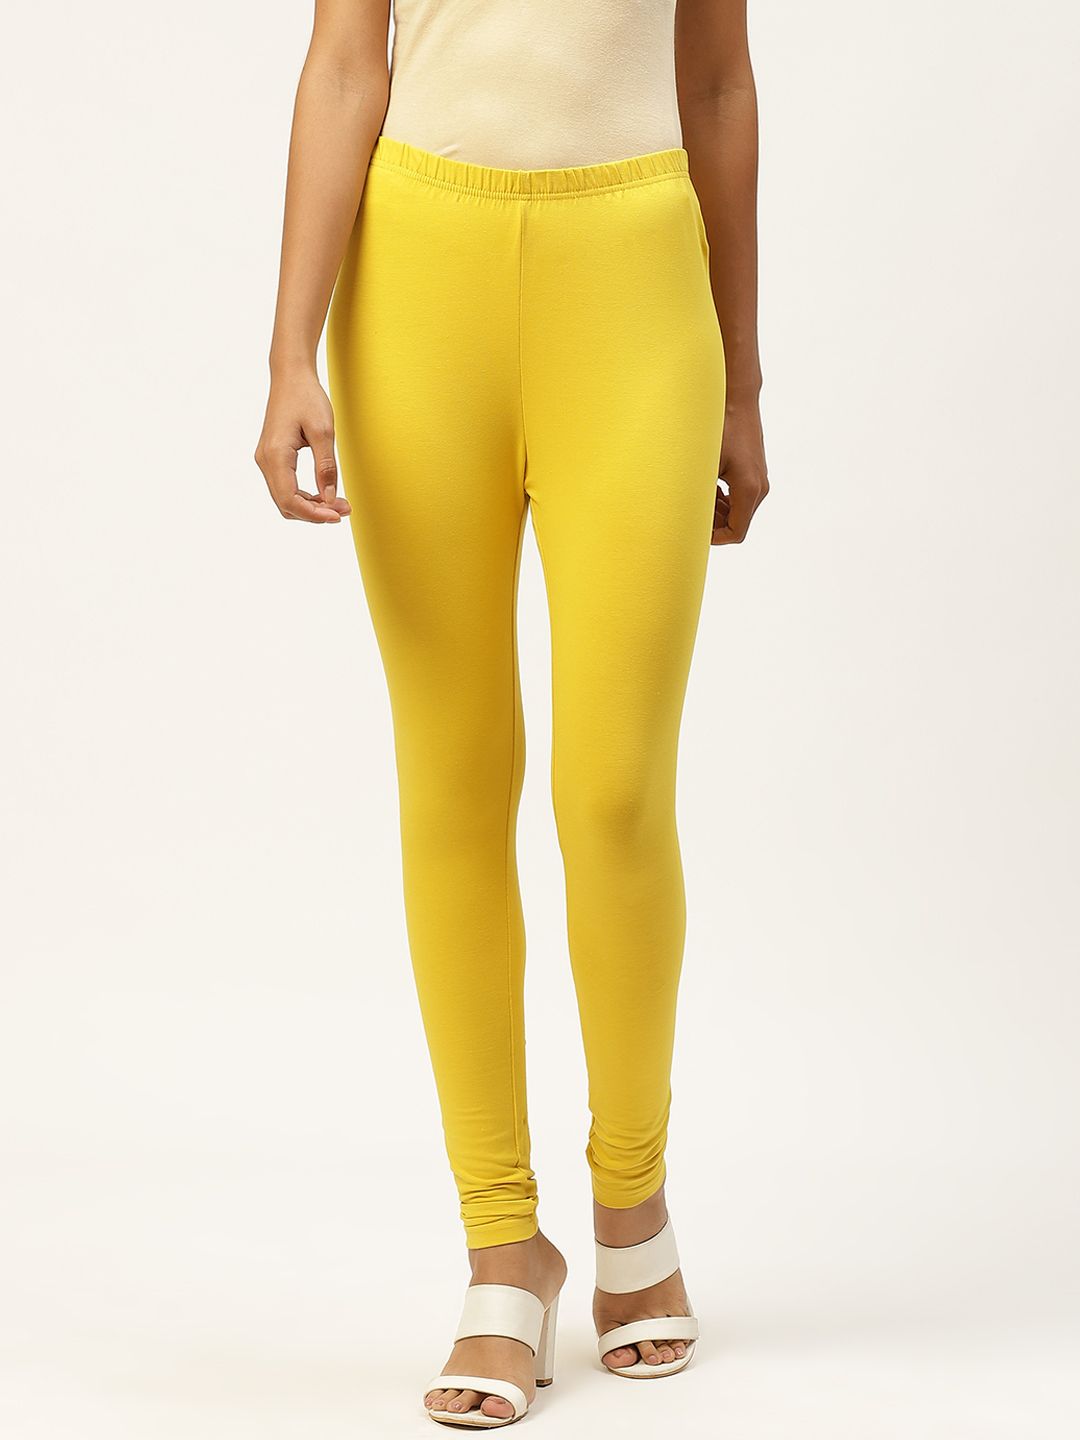 Monte Carlo Women Yellow Solid Knitted Pure Cotton Churidar Leggings Price in India